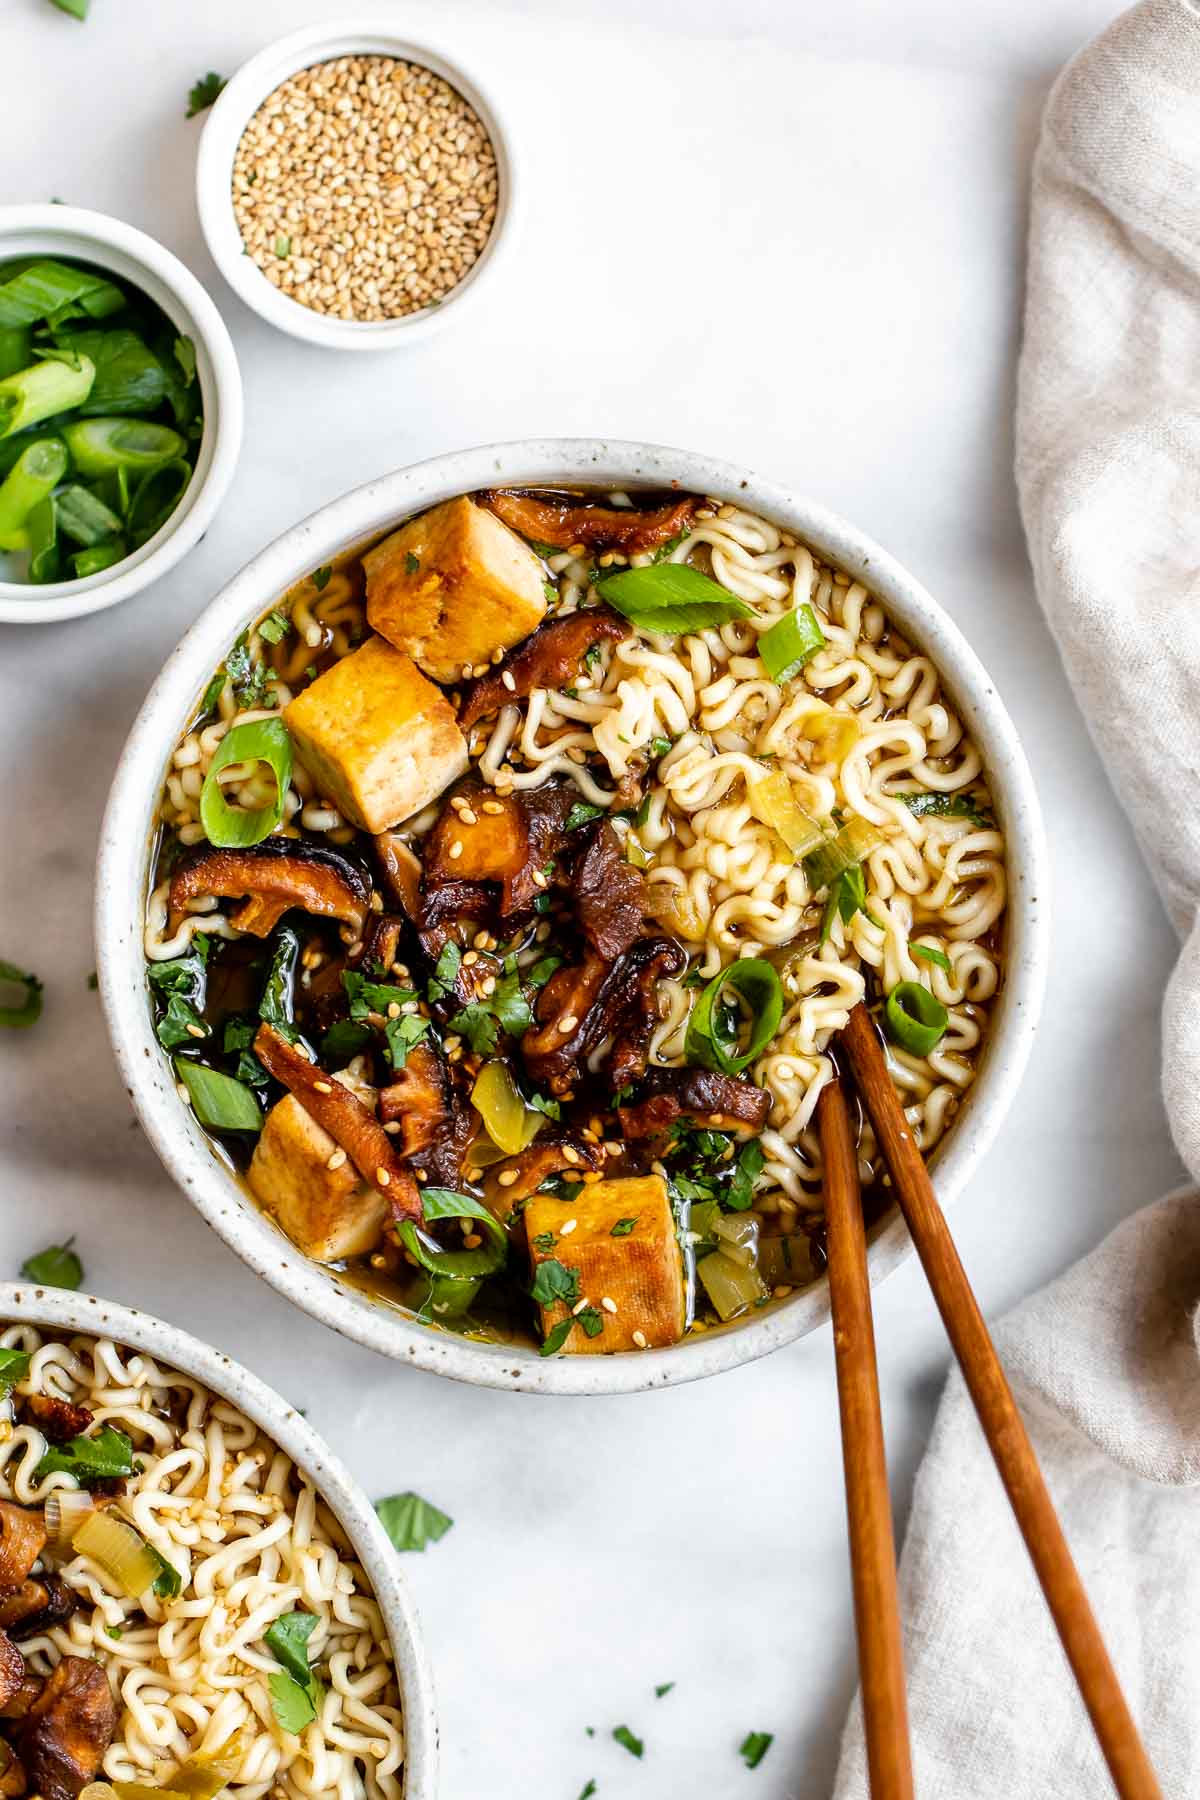 Vegan ramen noodles with mushrooms and tofu in a small bowl.